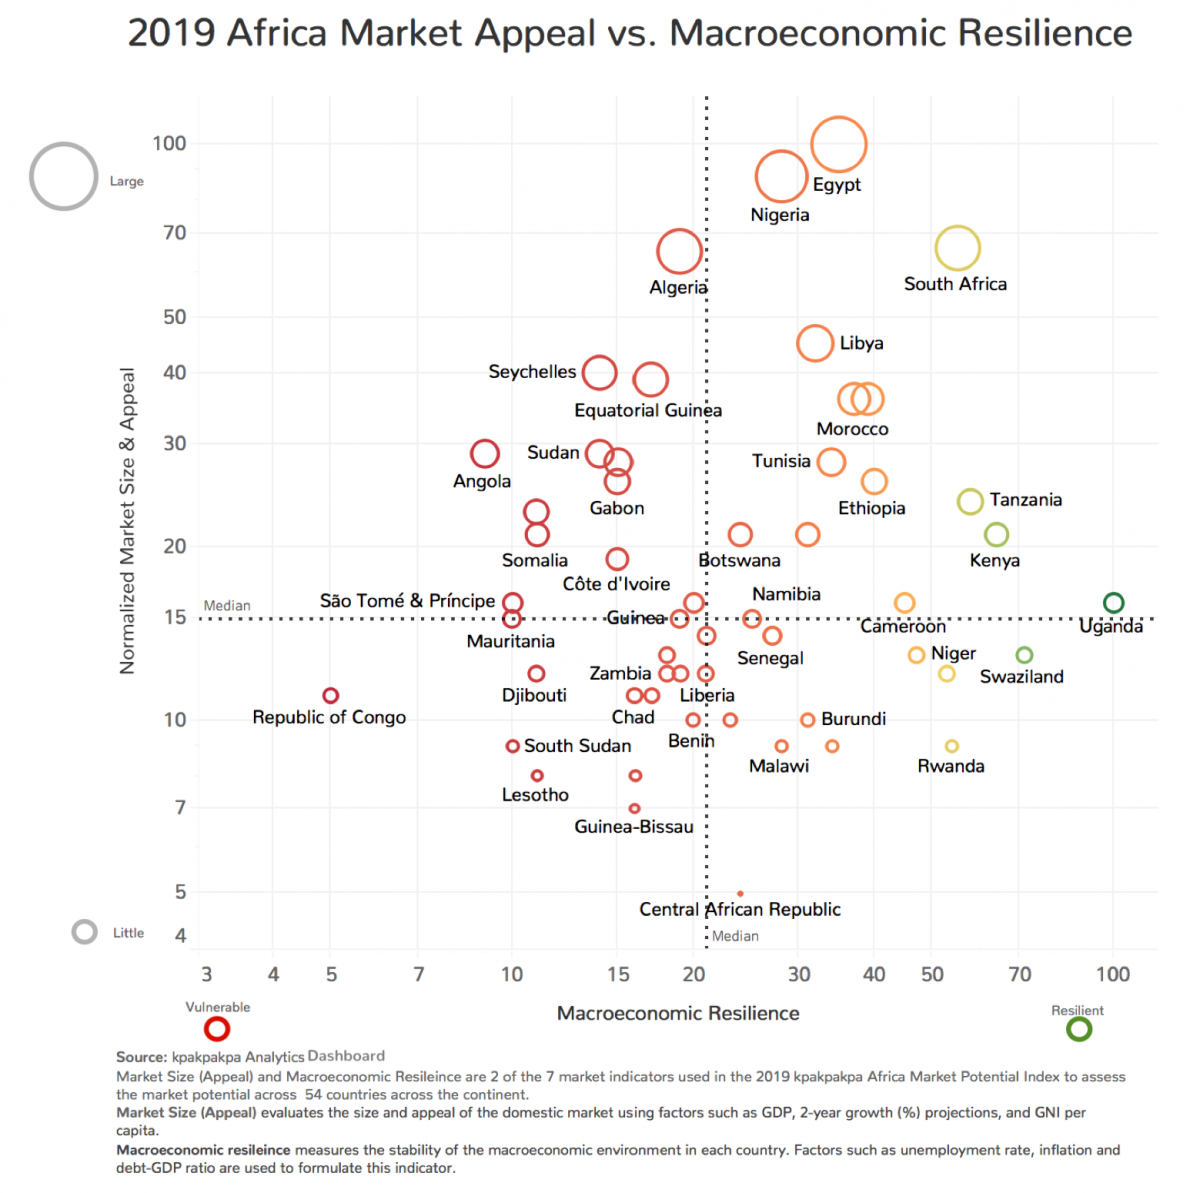 Africa Strategy - Market Appeal vs. Macroeconomic Resilience